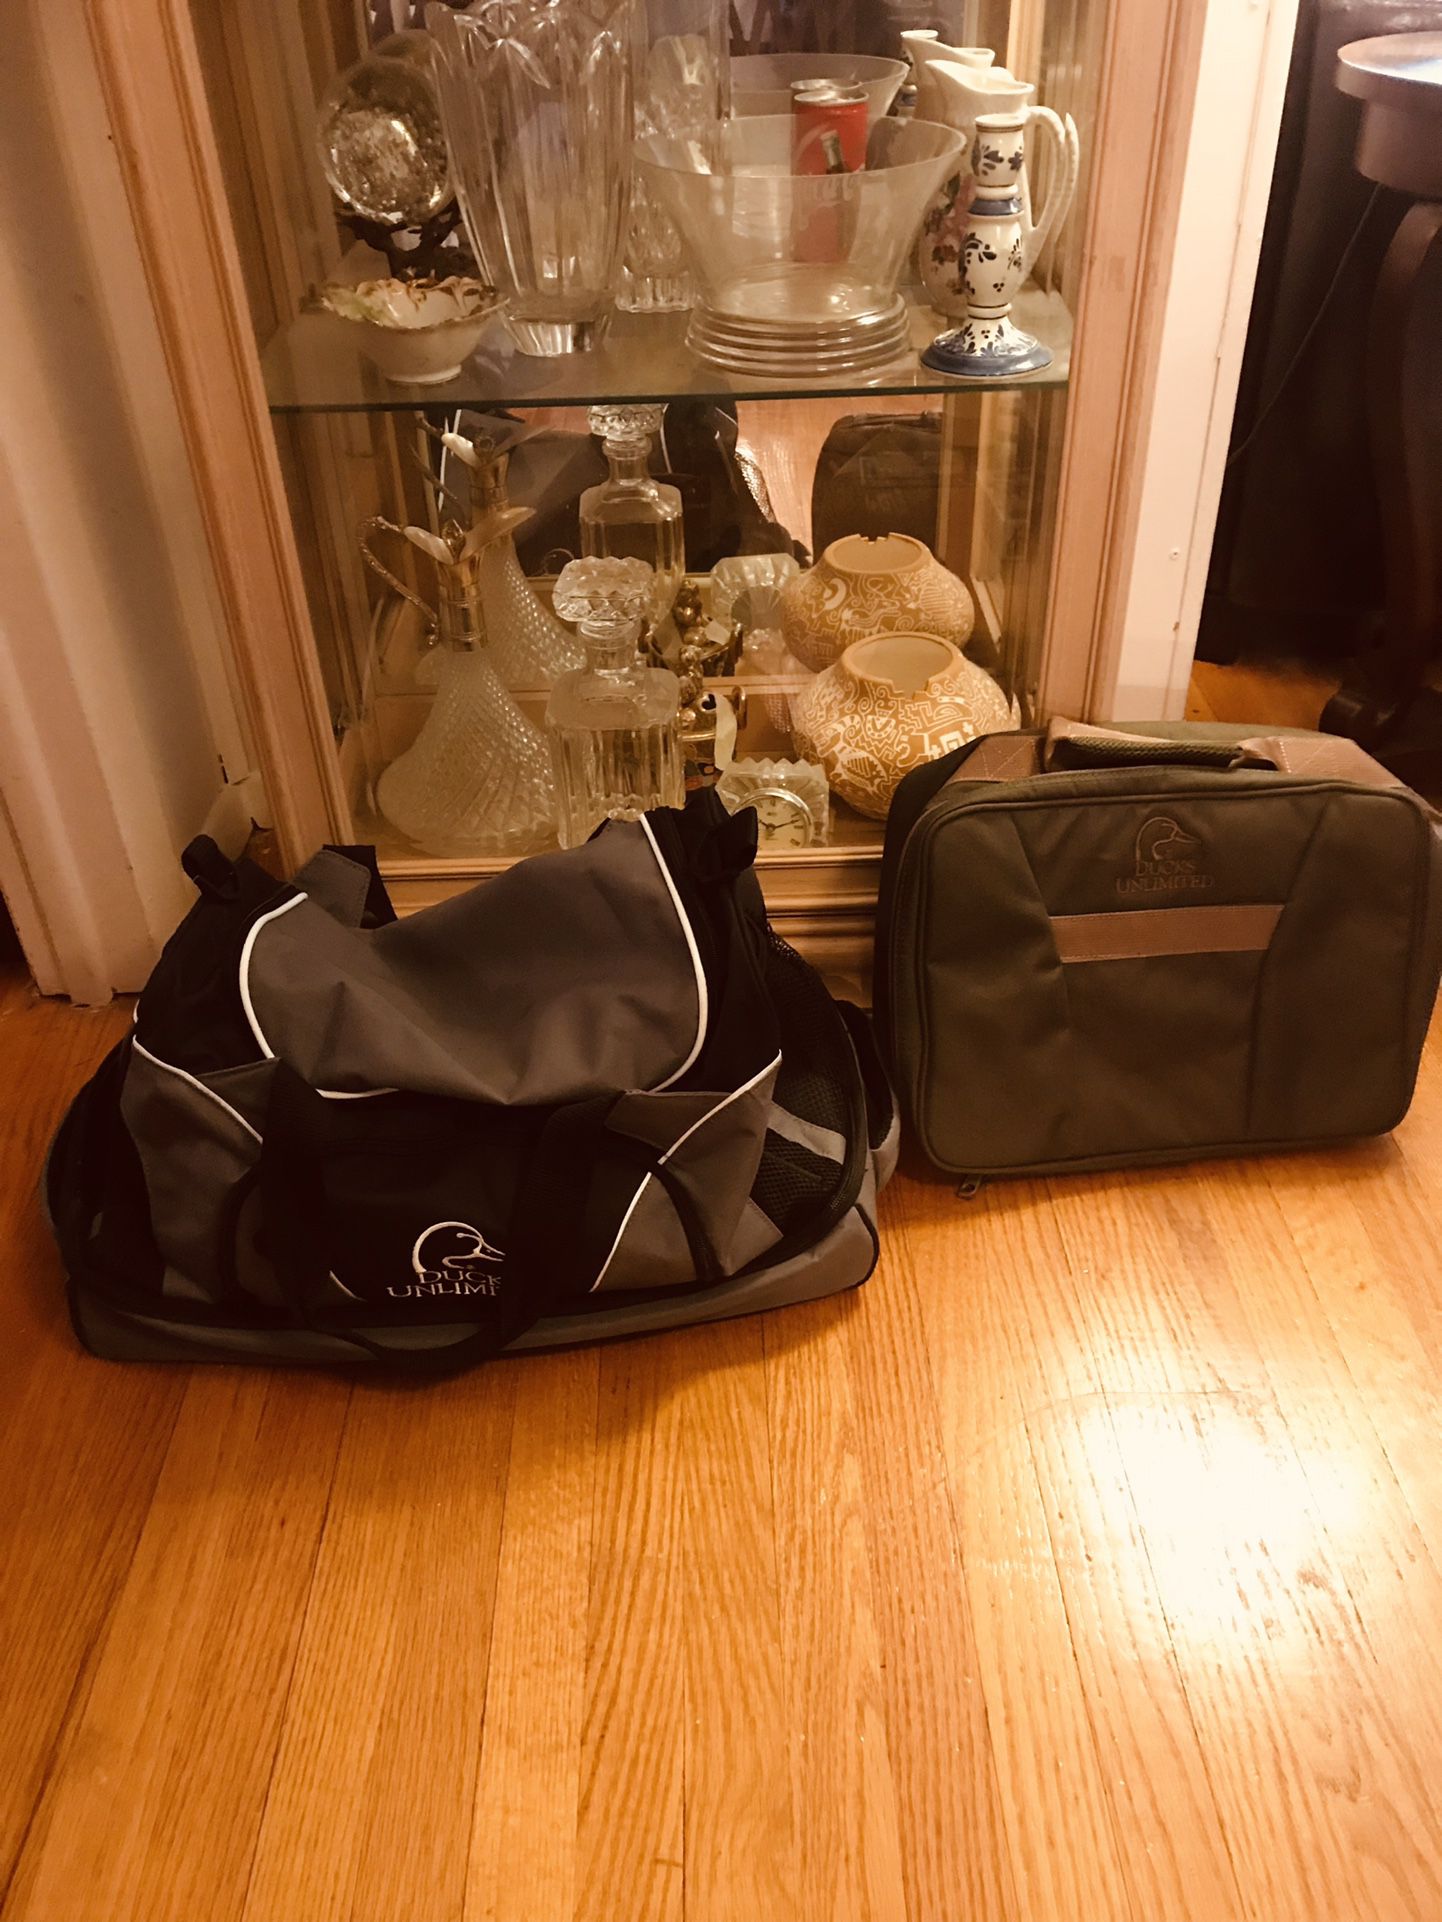 Ducks Unlimited Duffle Bag Has Plenty Of Space Shown In Pics and a All Purpose Bag ( I Will sell Separately) Read Description 